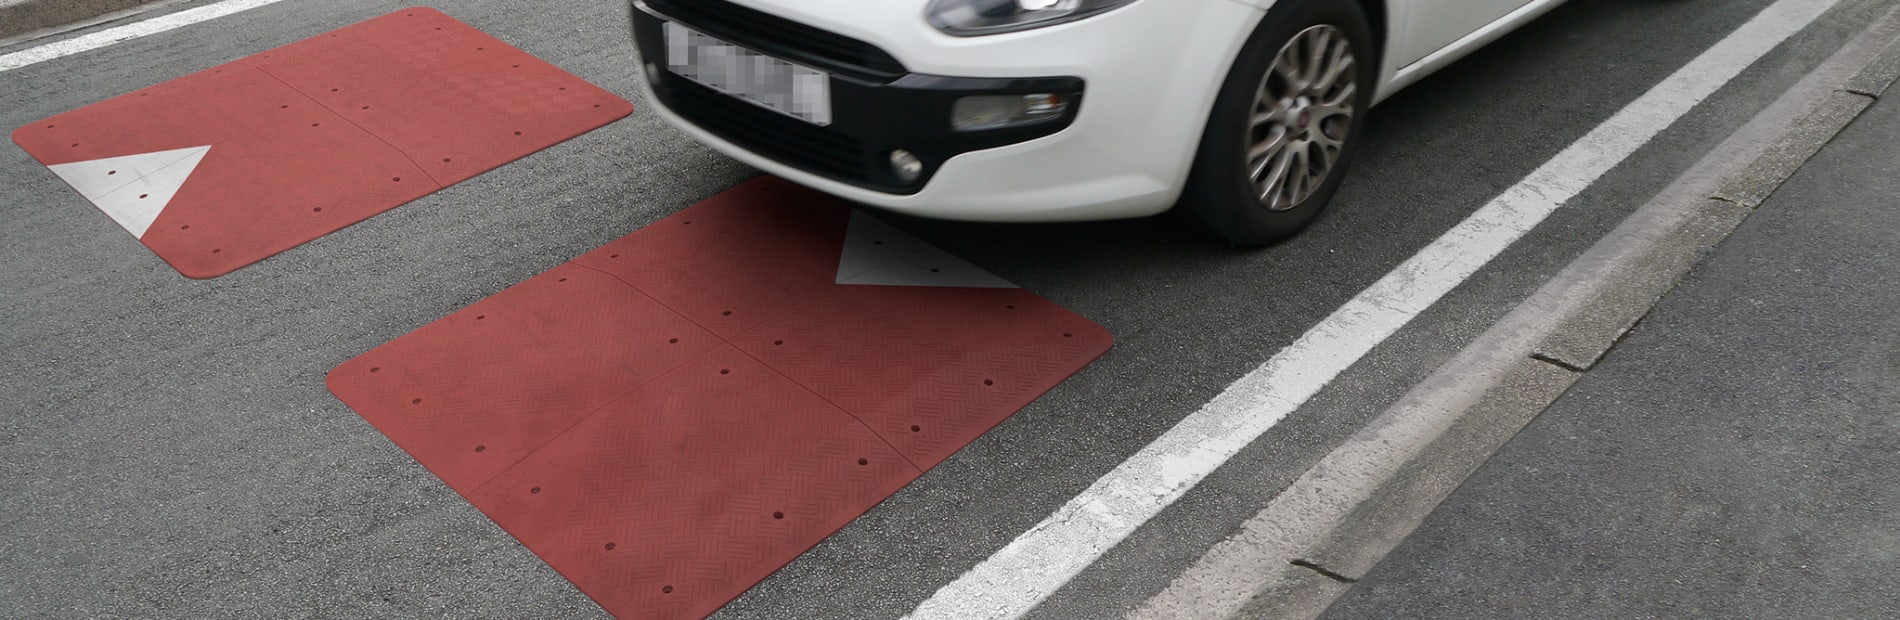 White car driving over a red reinforced speed cushion.